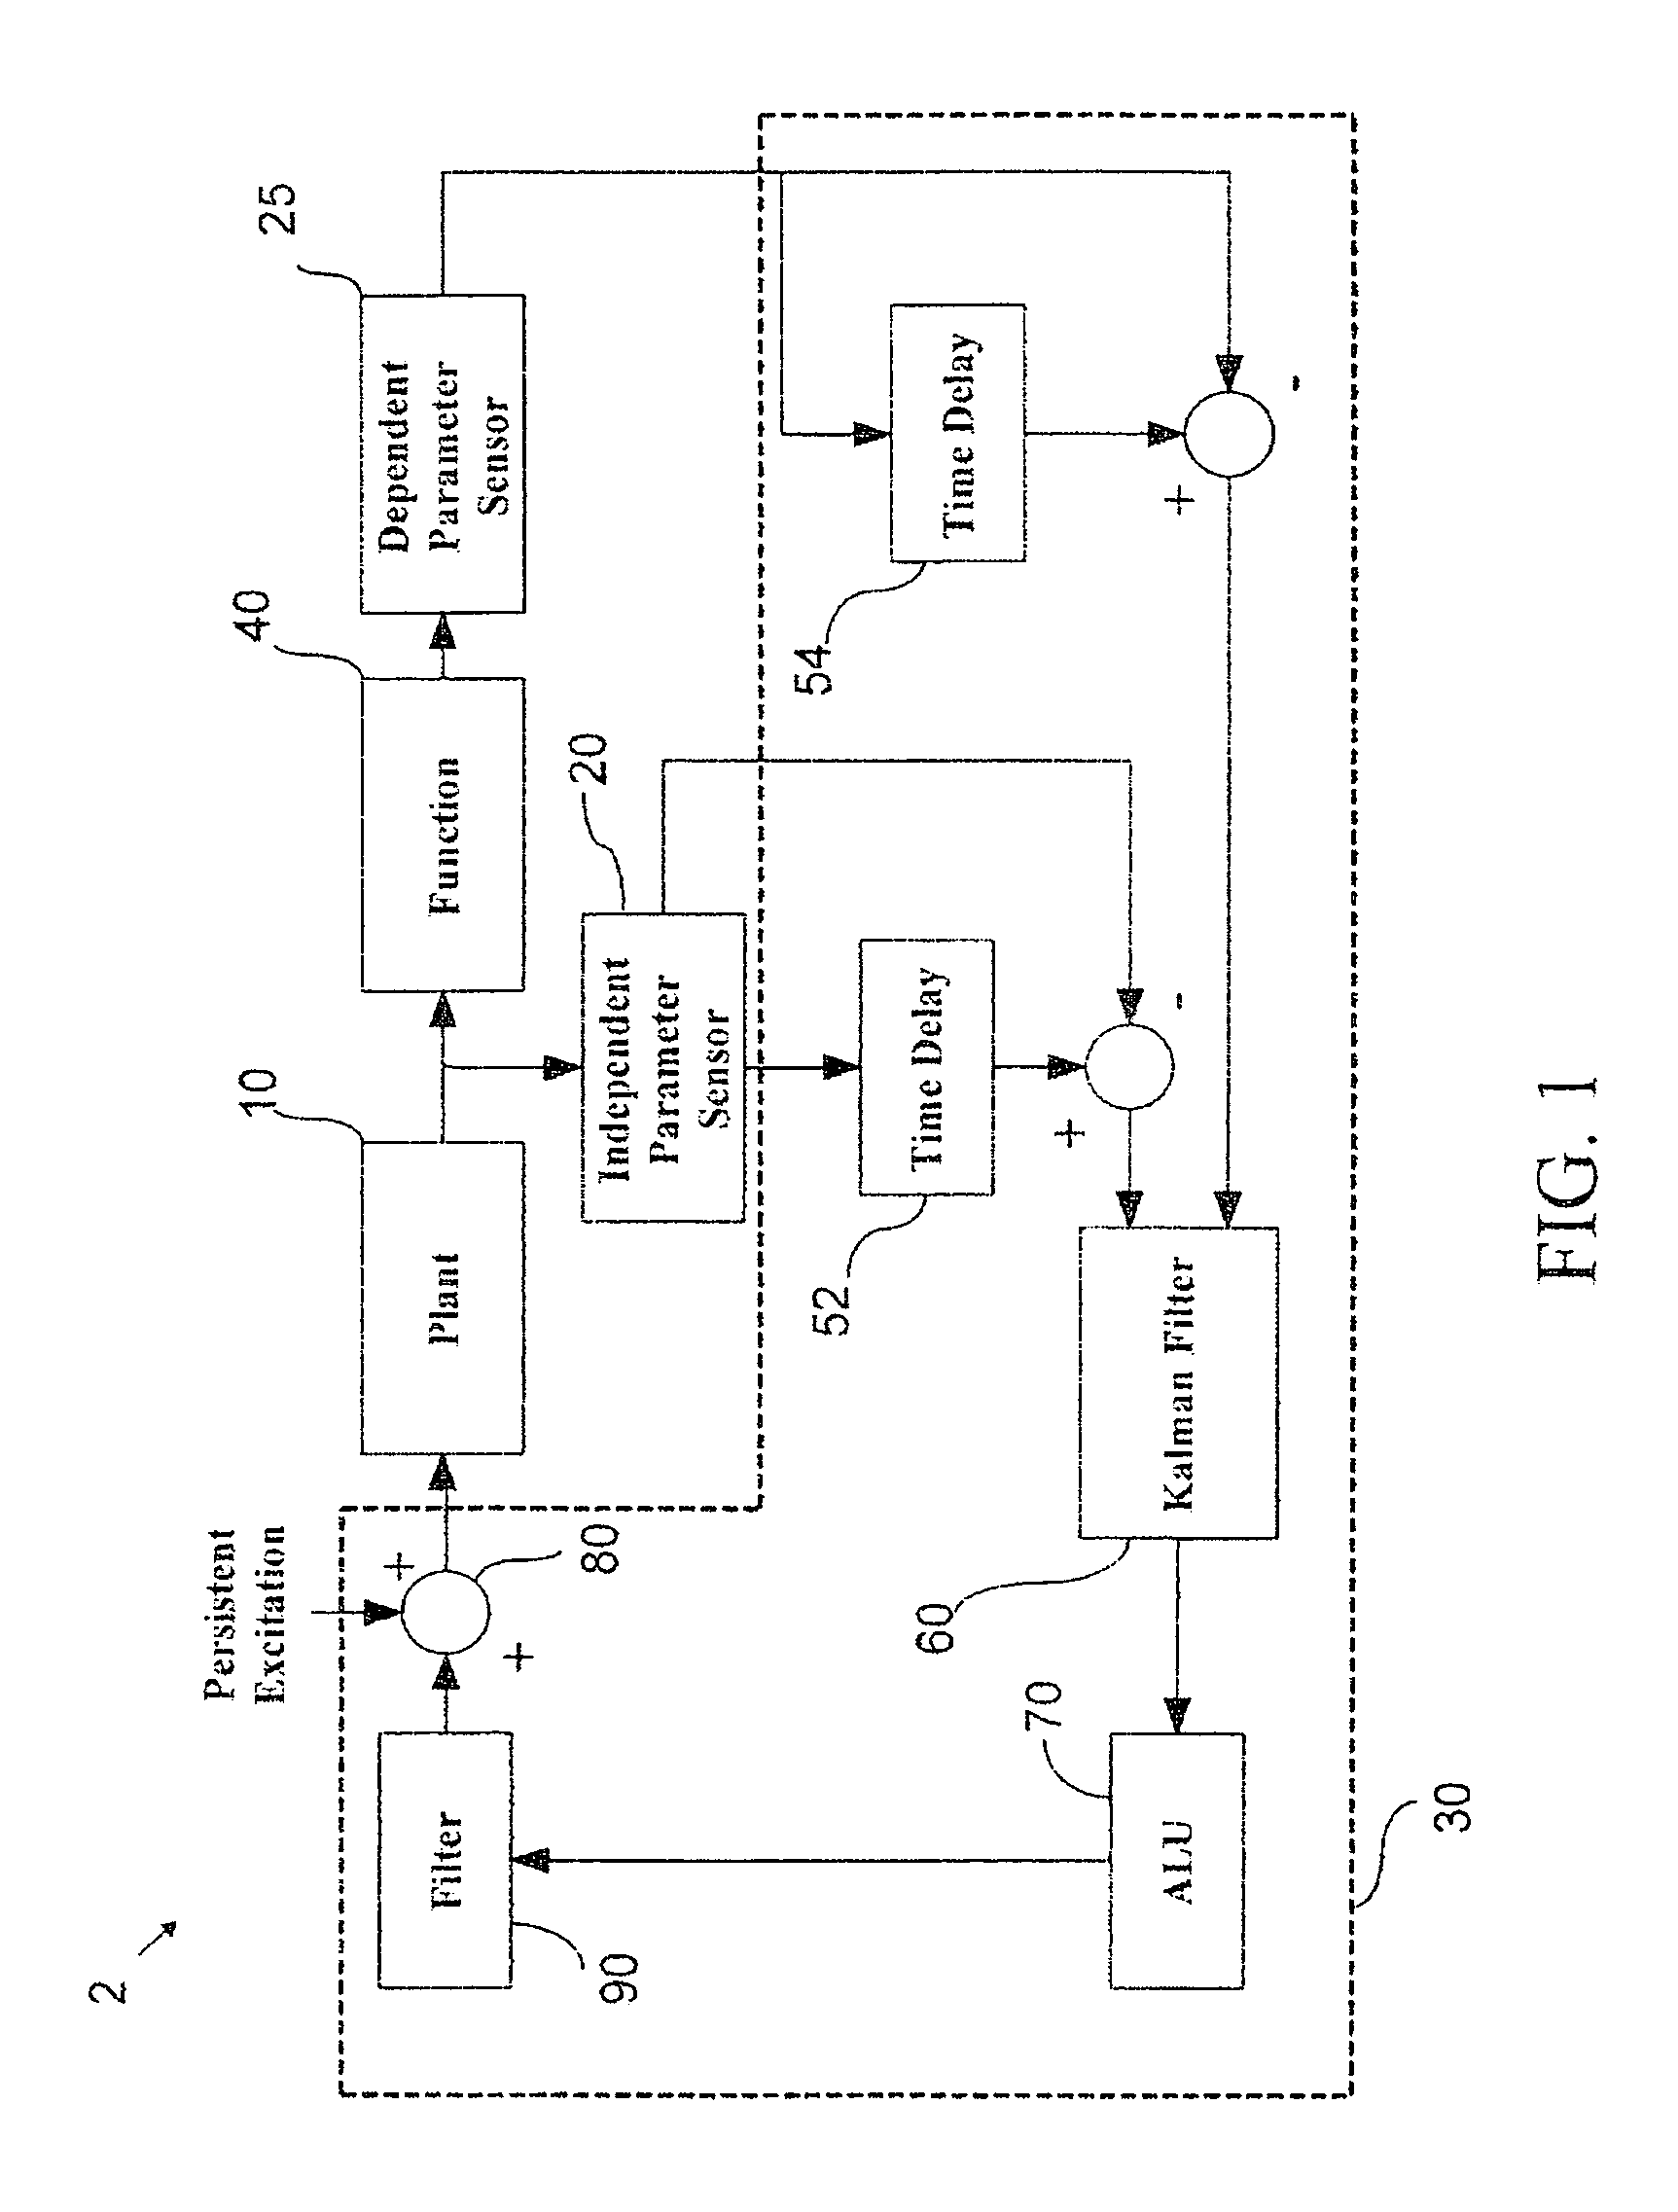 Systems and methods for peak-seeking control